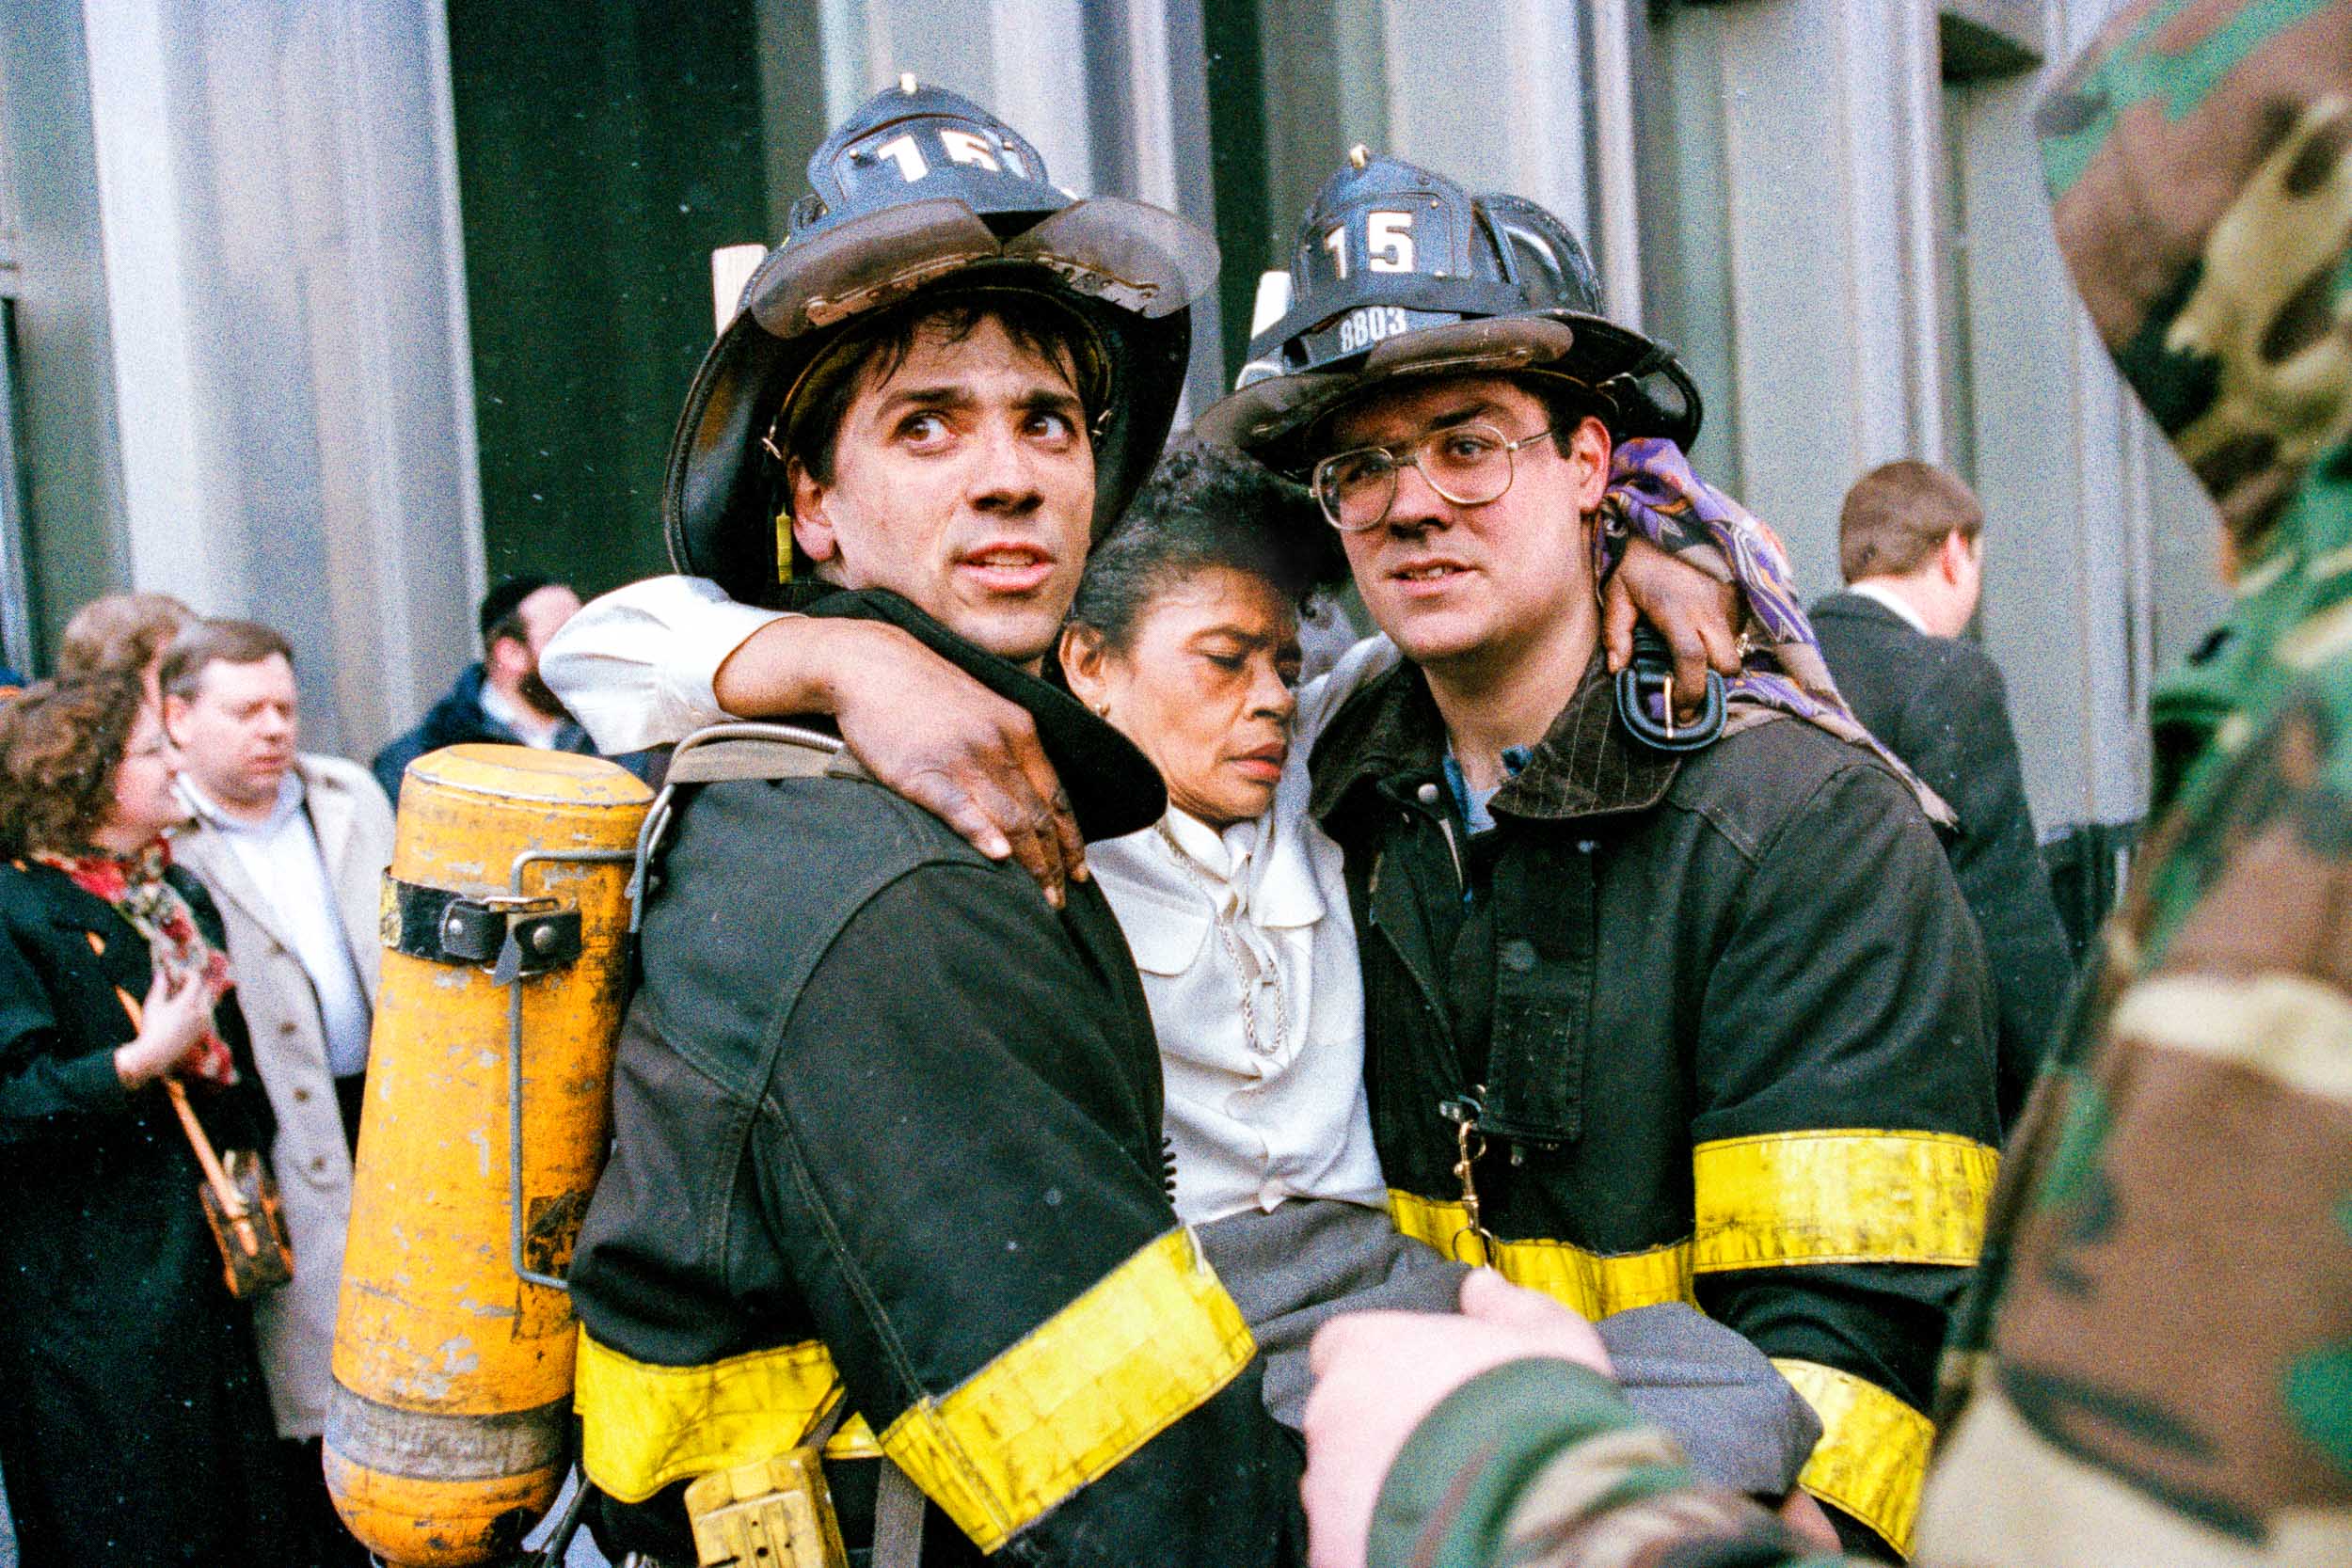  Firemen carry out an injured office worker from the lobby of the World Trade Center, NY, 1993